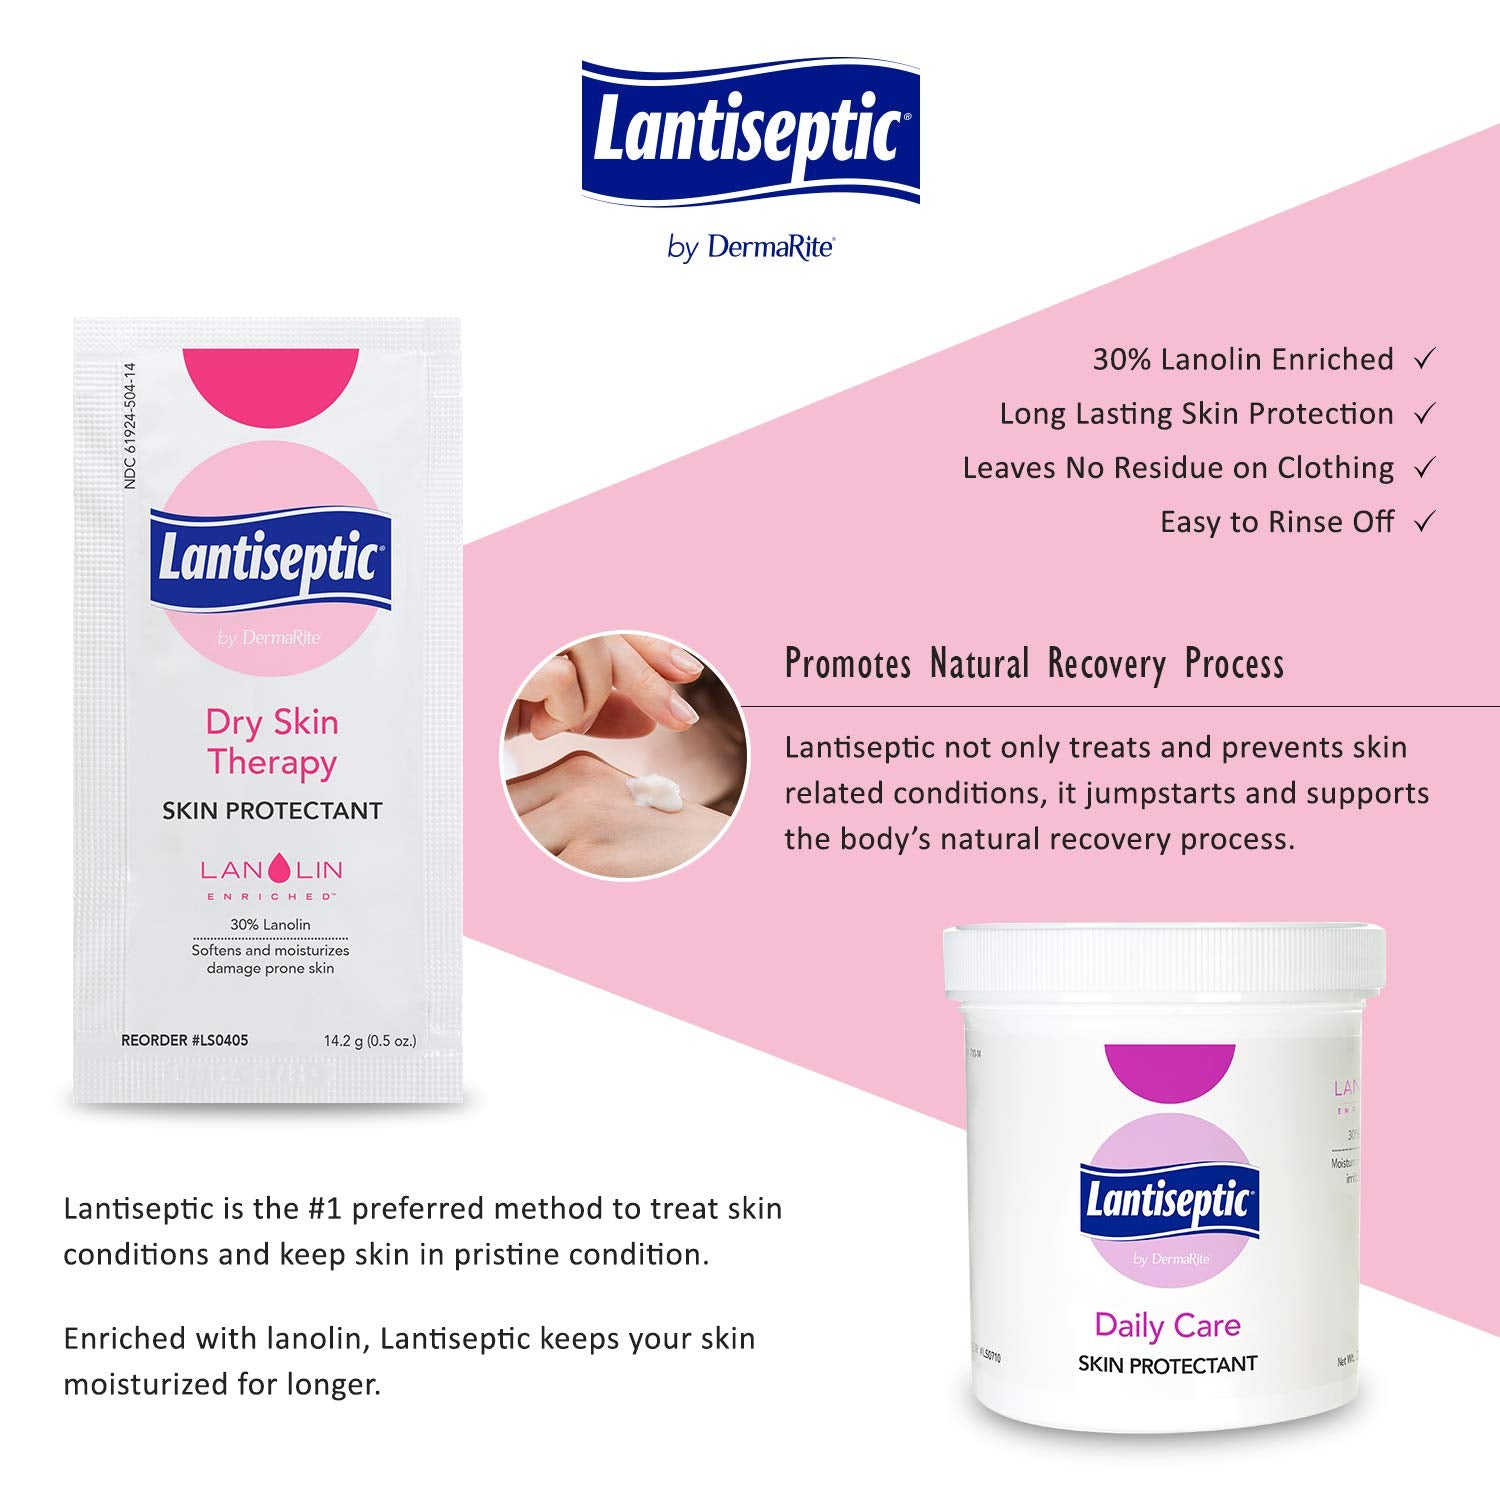 Lantiseptic Daily Dry Skin Protectant Cream - Moisturizes and Protects Cracked, Damaged and Irritated Skin - 30% Lanolin Moisture Barrier Ointment